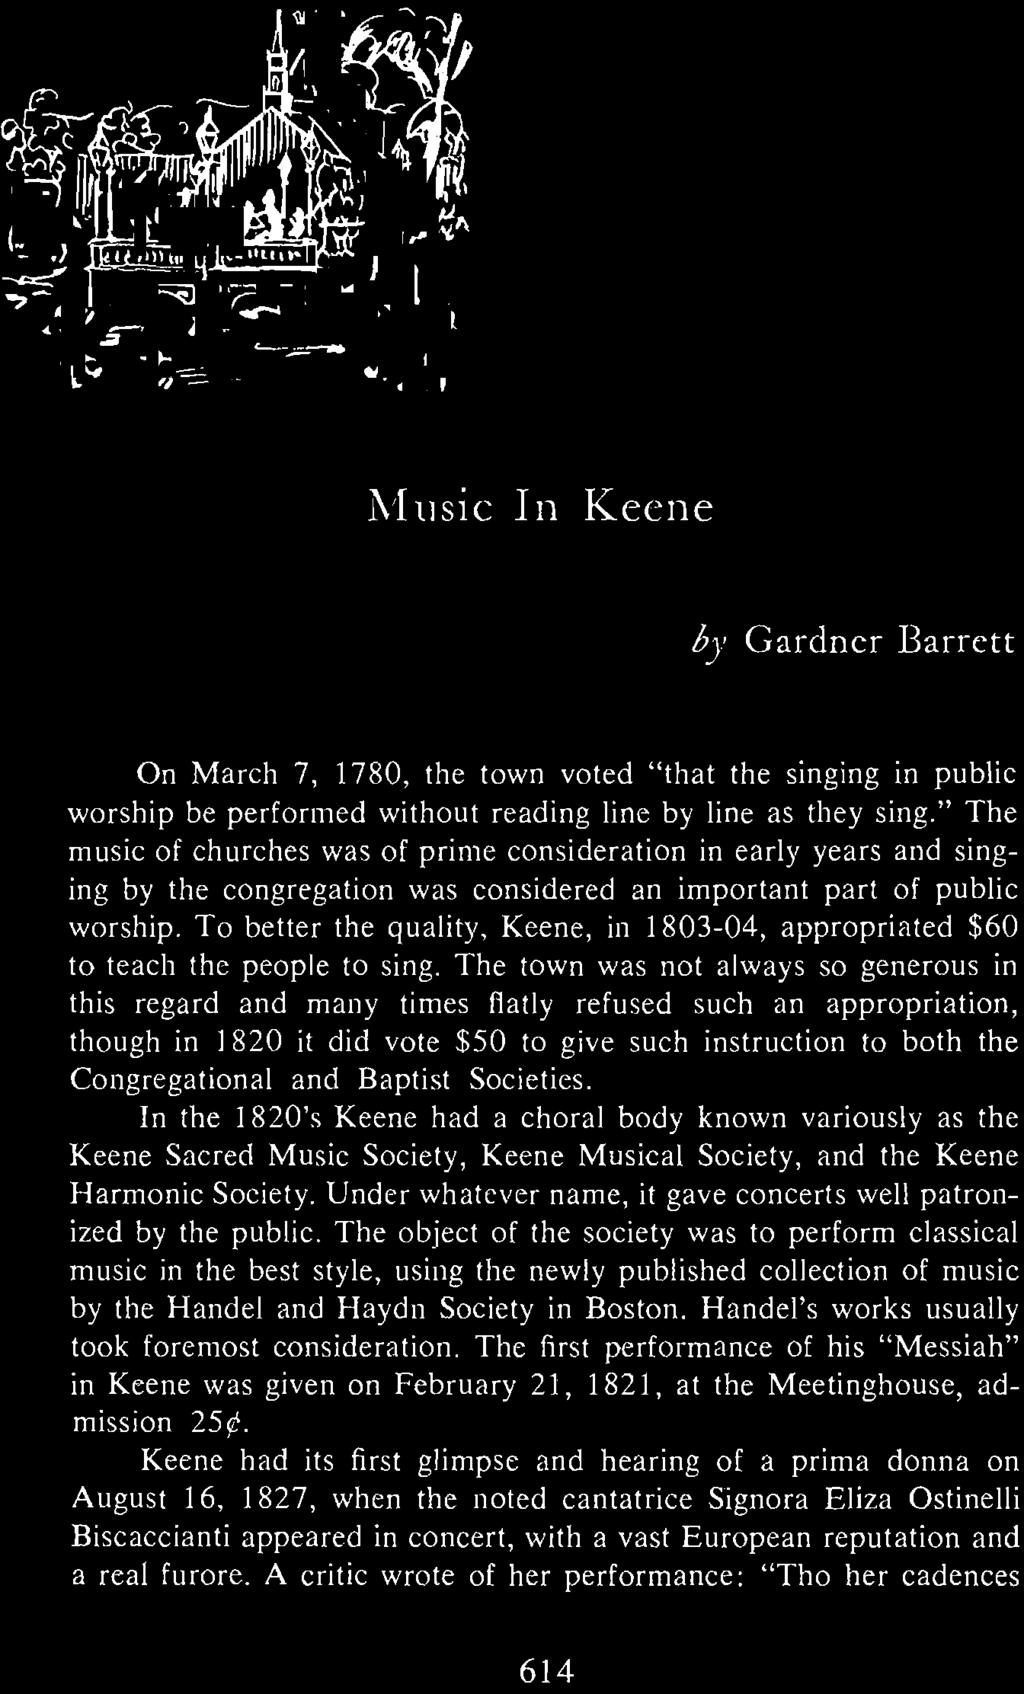 To better the quality, Keene, in 1803-04, appropriated $60 to teach the people to sing.